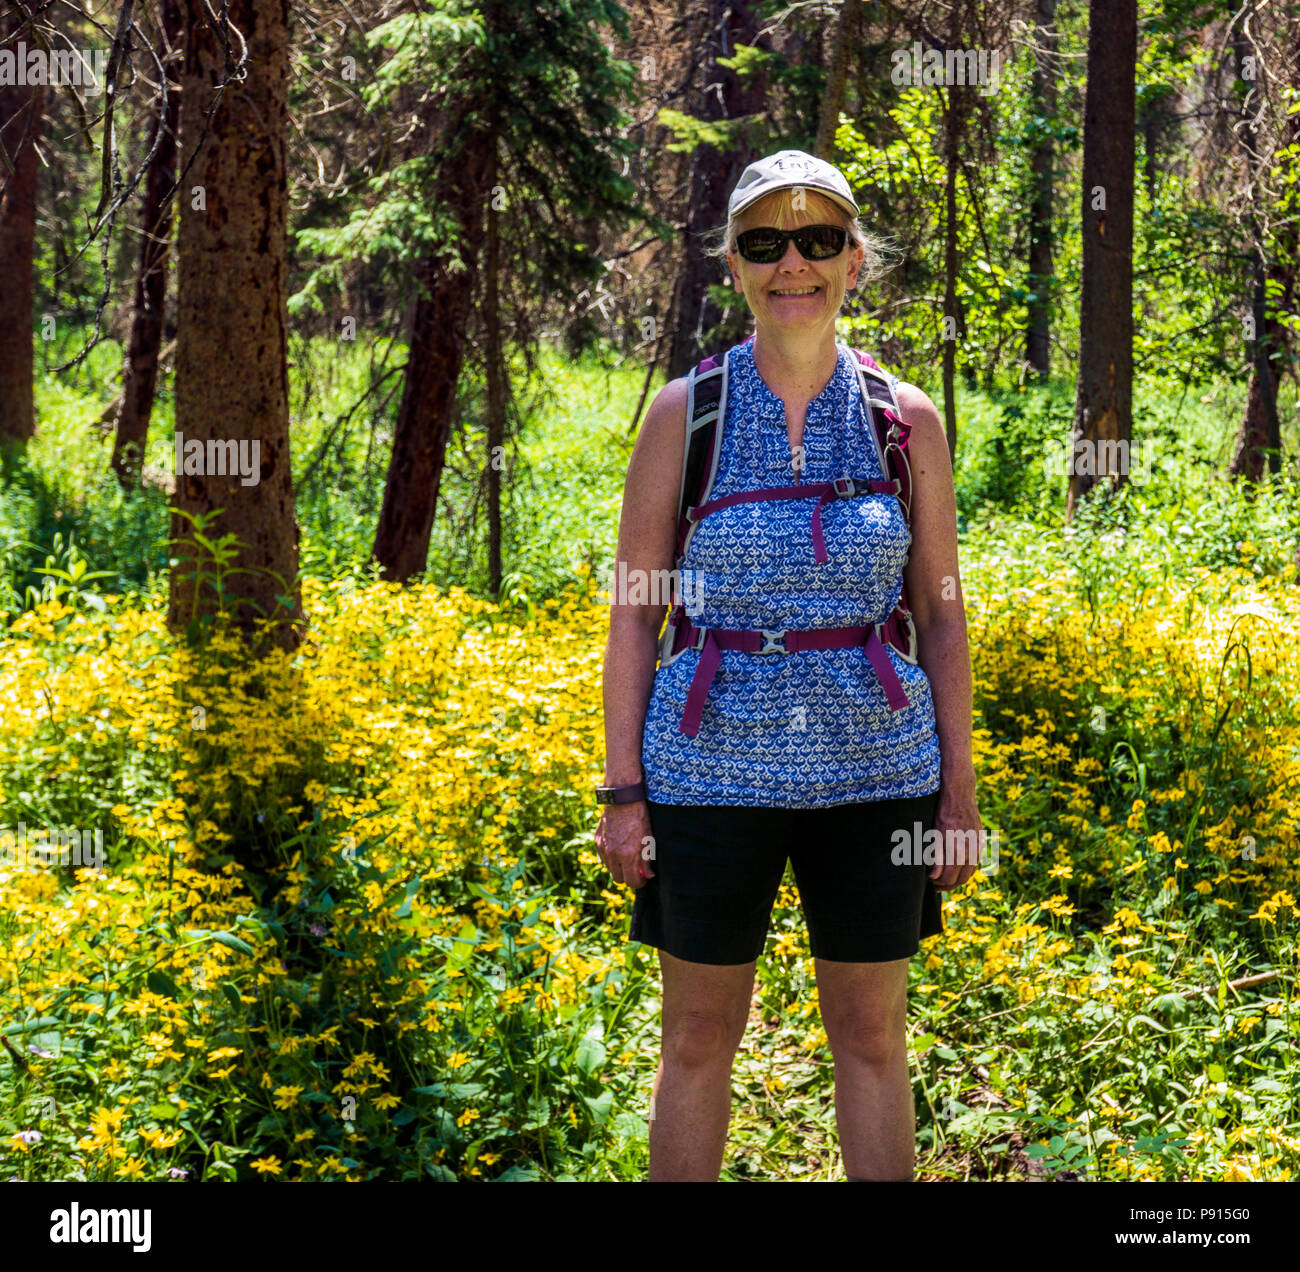 Female hiker poses for photograph amongst Heartleaf Arnica; Sunflower wildflowers; South Fooses Creek; Central Colorado; USA Stock Photo